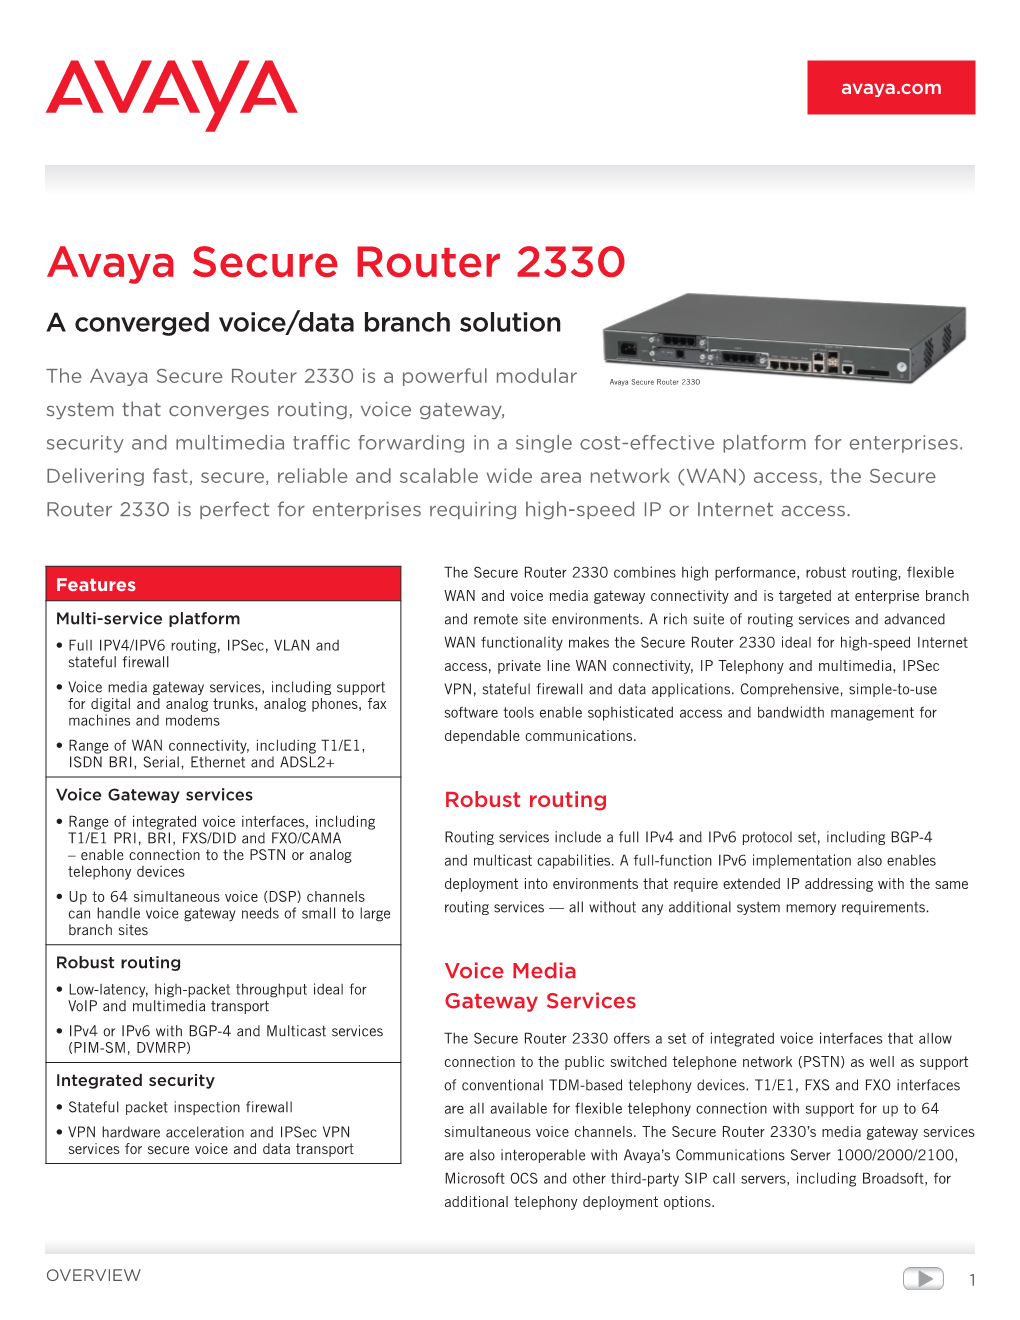 Avaya Secure Router 2330 a Converged Voice/Data Branch Solution